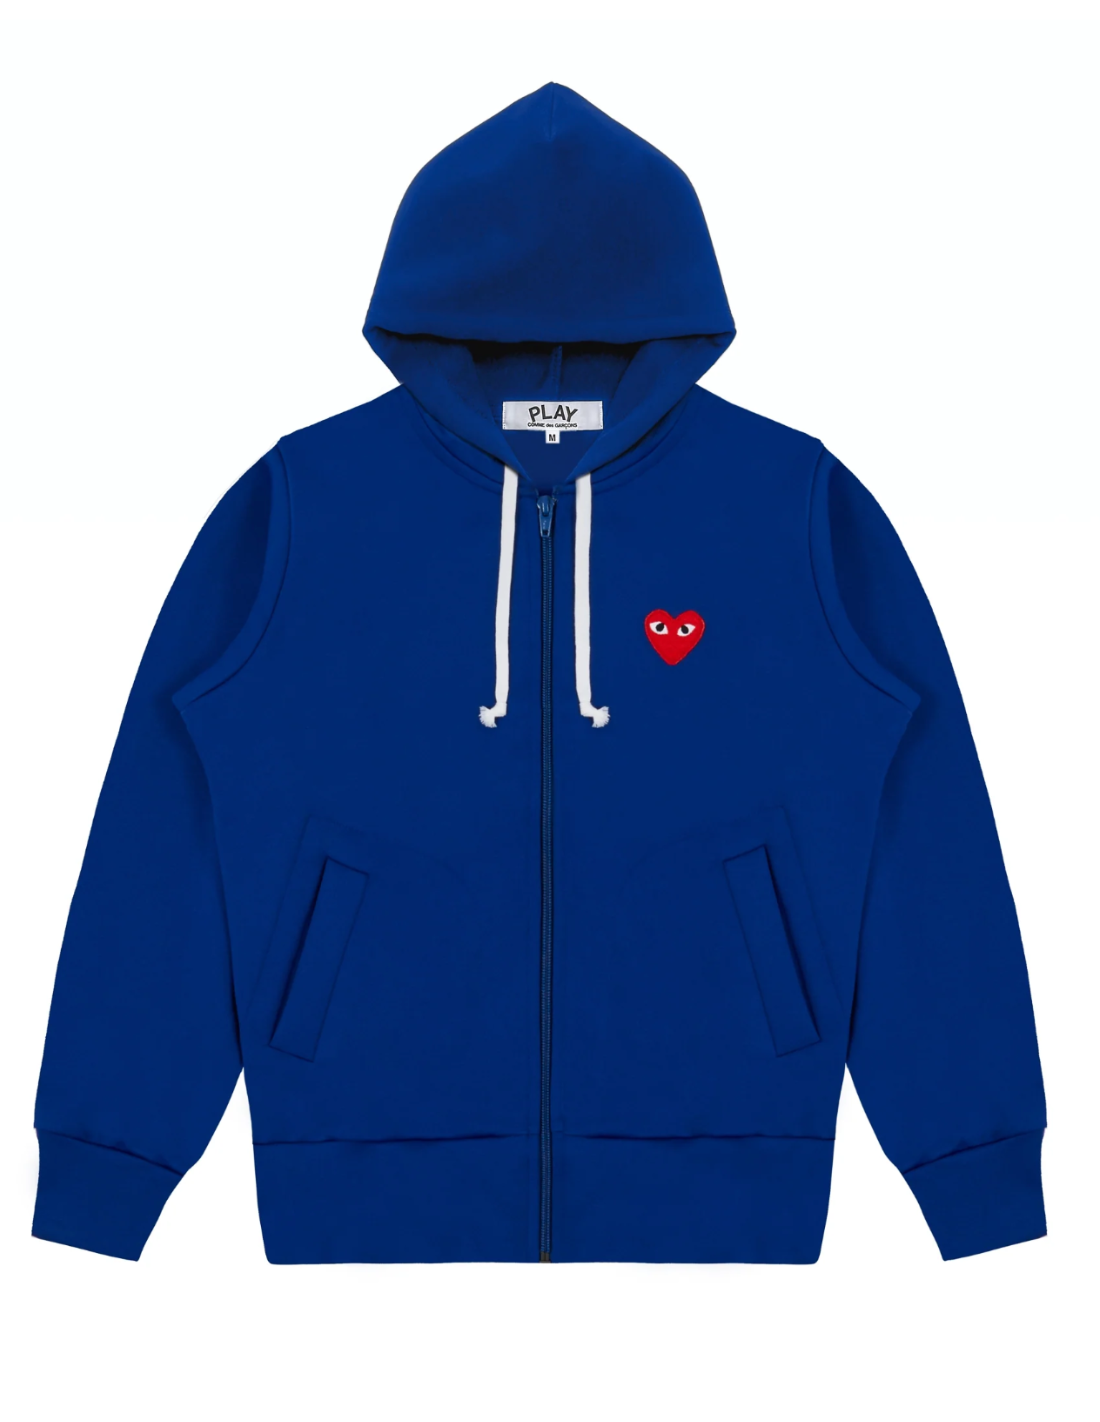 Comme Des Garçons Play blue zipped hoodie with red heart patch.